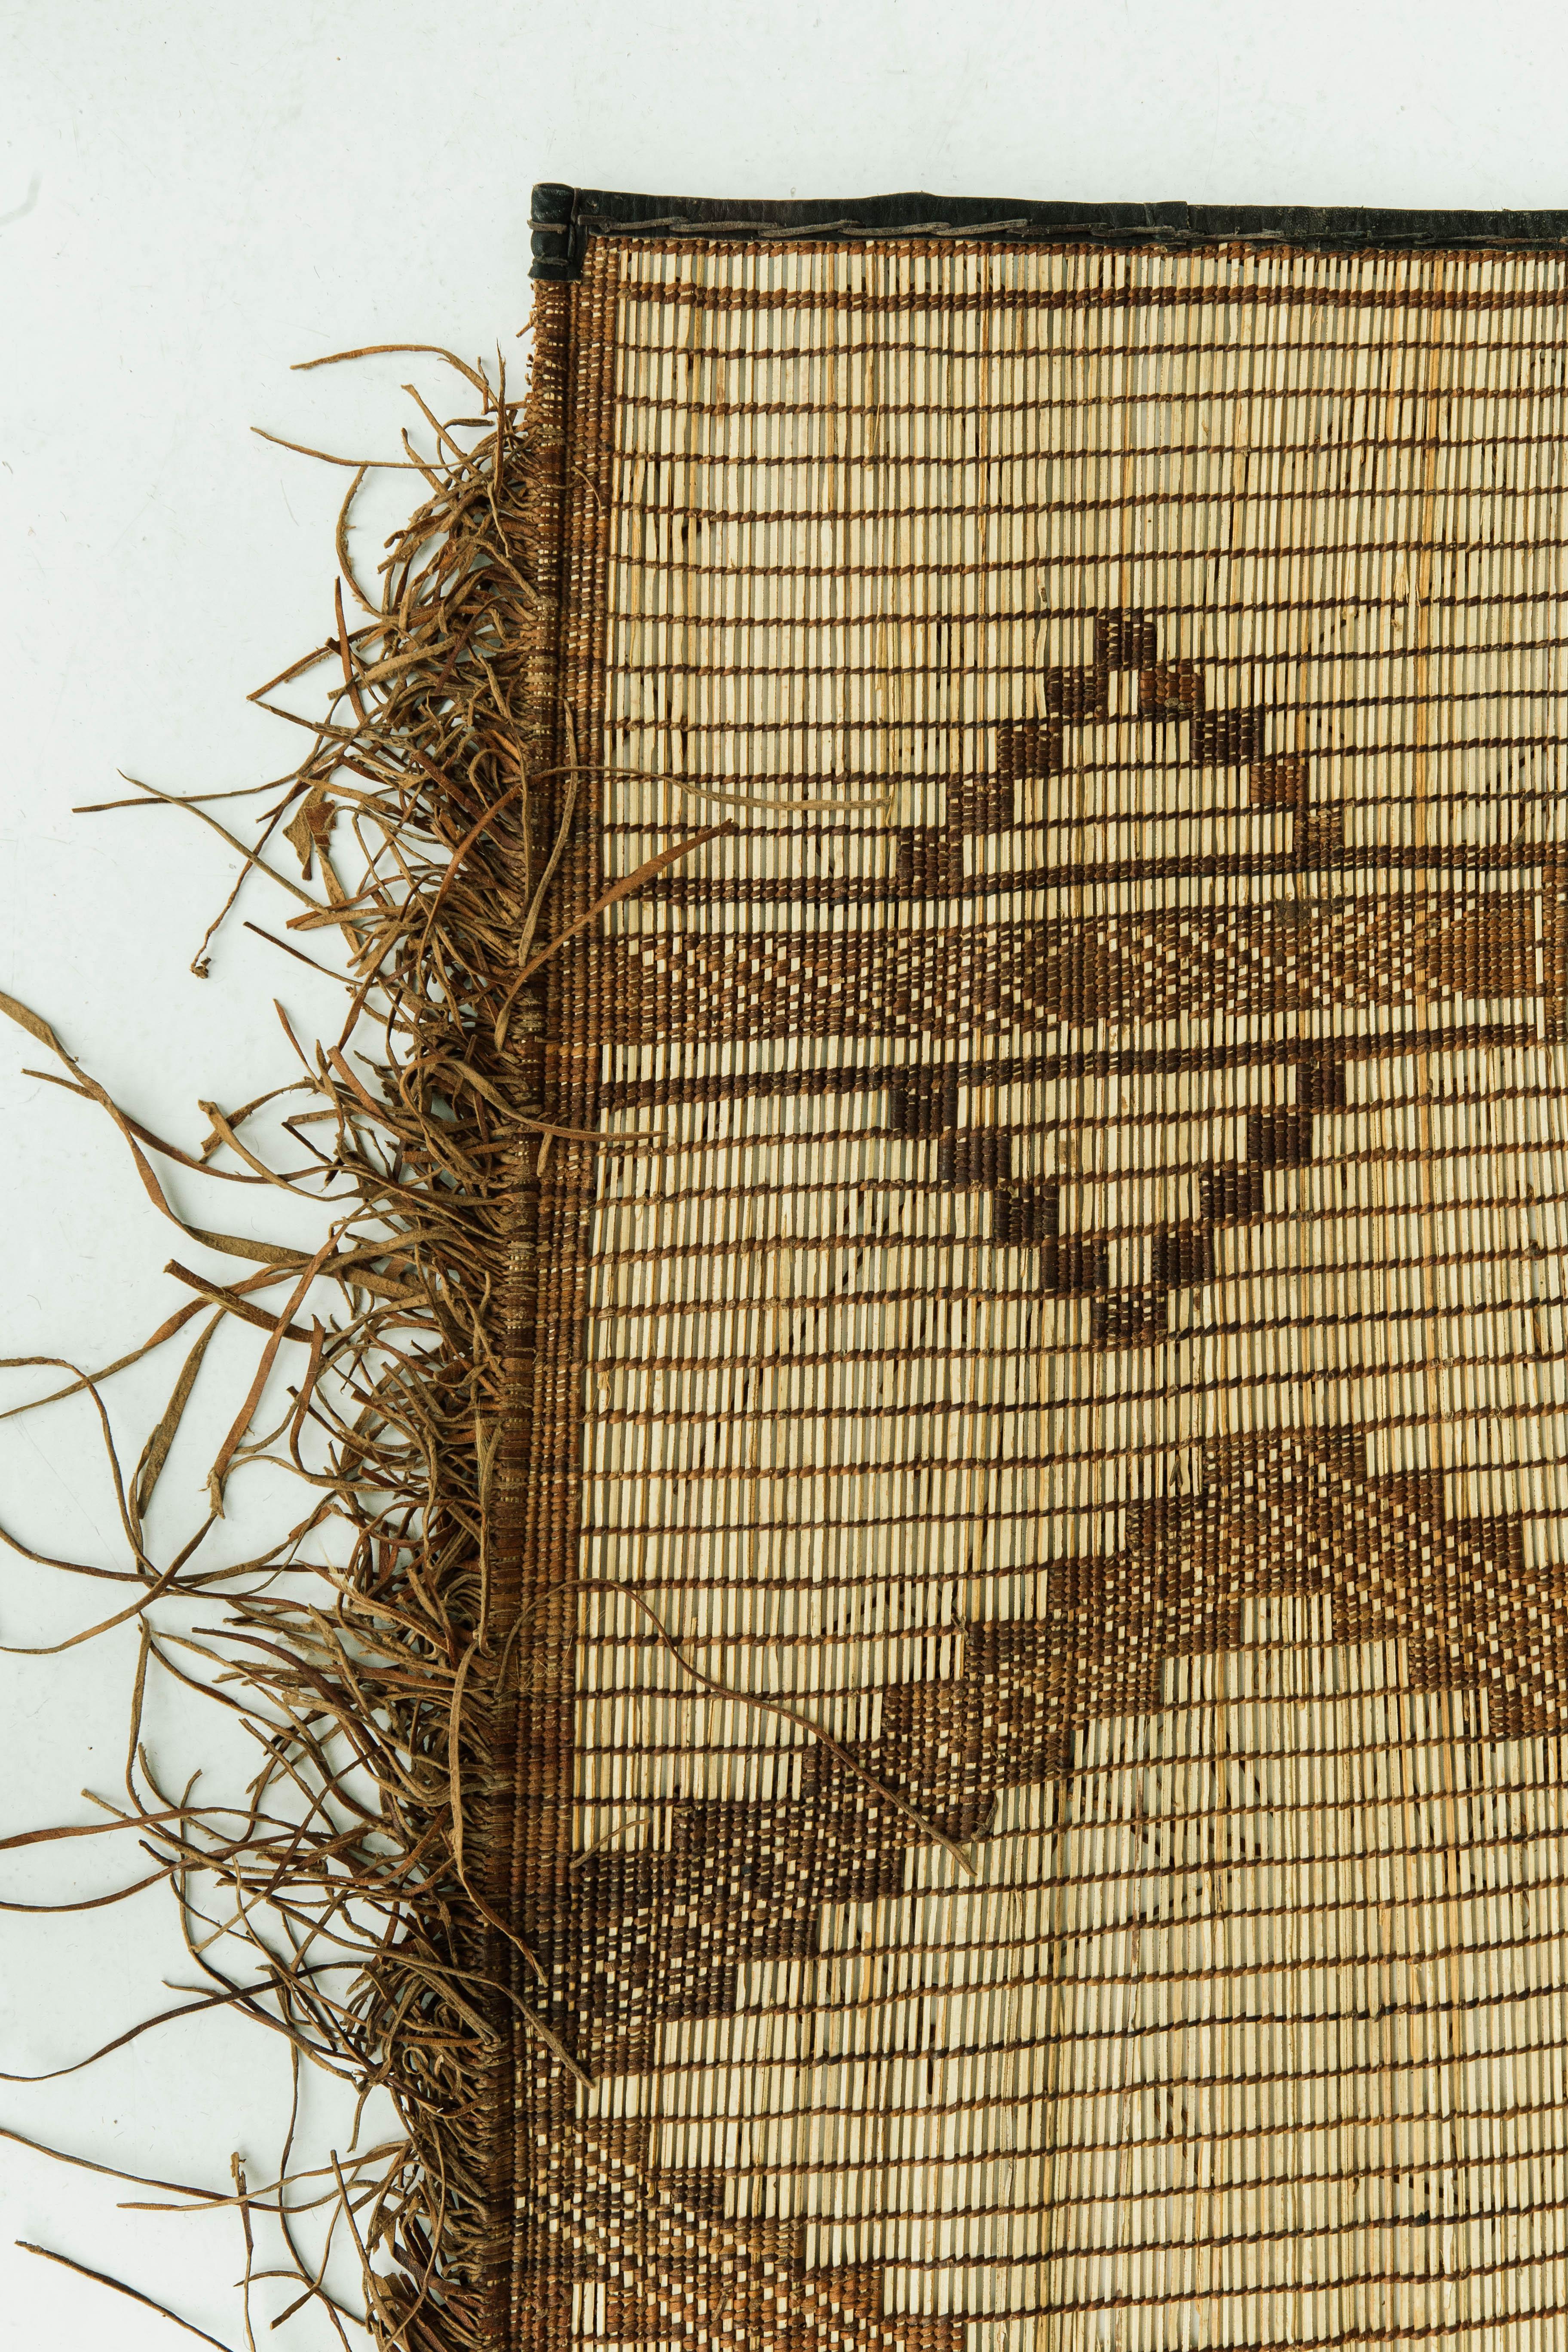 A beautiful and unique vintage Tuareg. This piece is handwoven of reed and leather by one of the oldest nomadic groups of the Saharan trade routes, the Tuaregs. This piece will elevate any design space with its tribal diamond design and eye catching